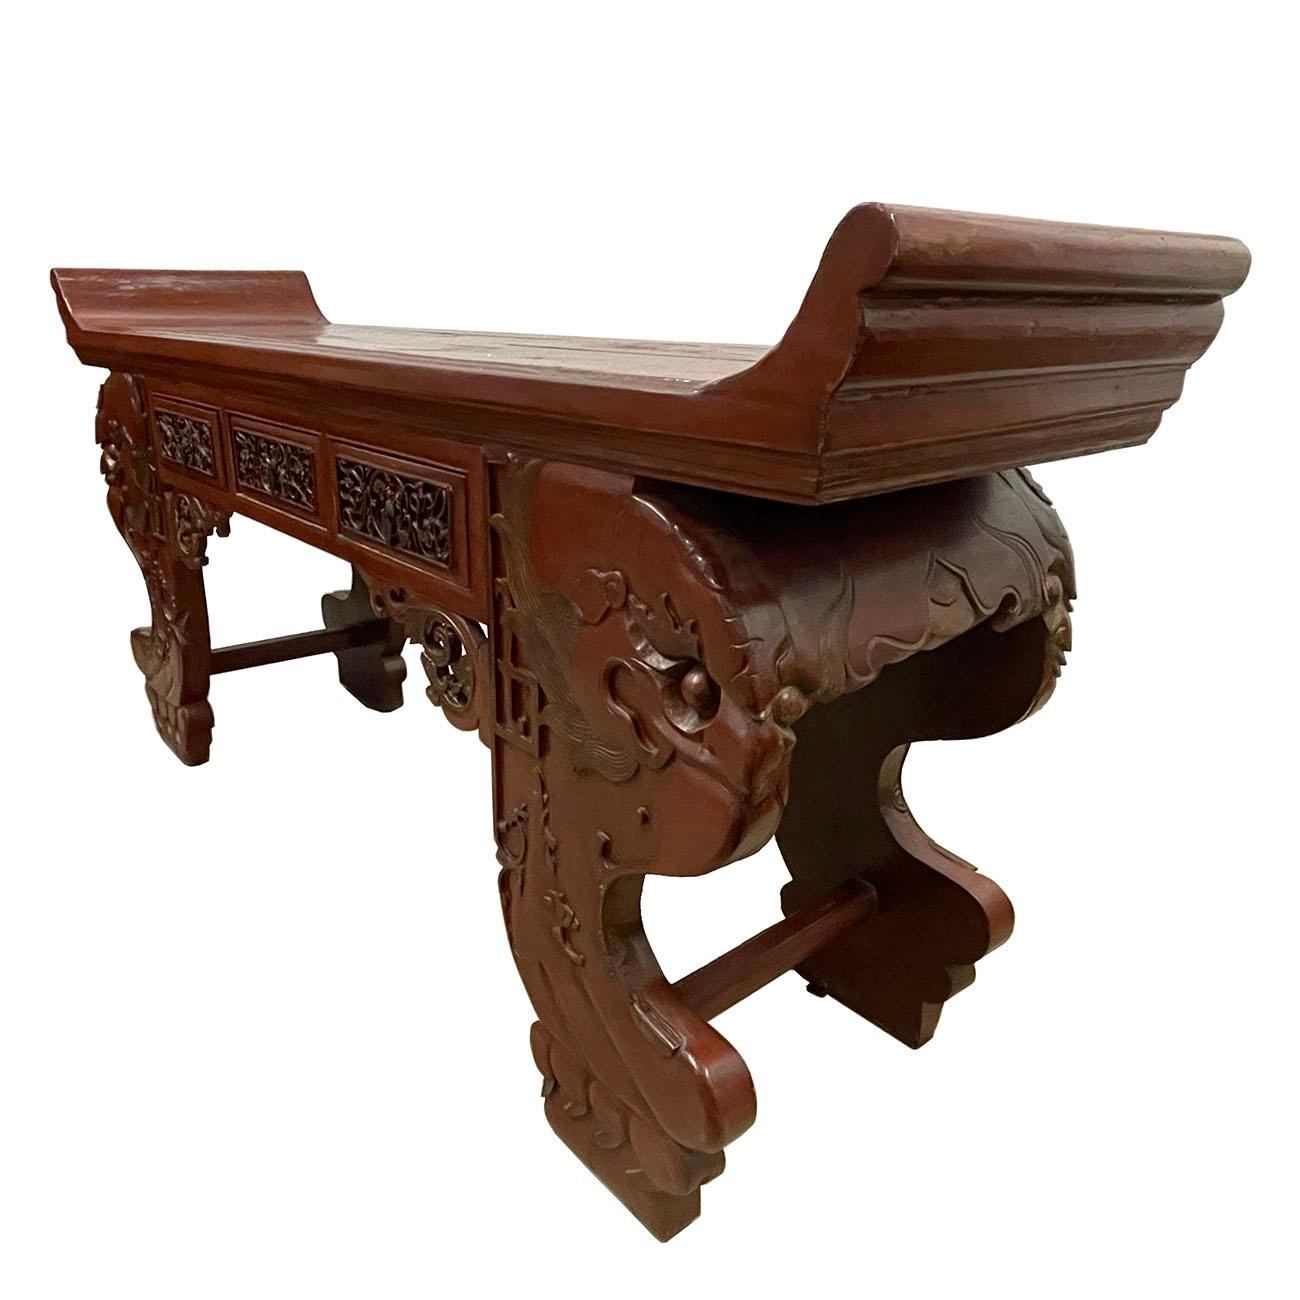 This massive antique red lacquered altar table from Shan Xi, China was hand made during 1800 to 1900 and still maintained very good condition. It shows the traditional style of Northern China's furniture cultural. This Chinese altar table is hand